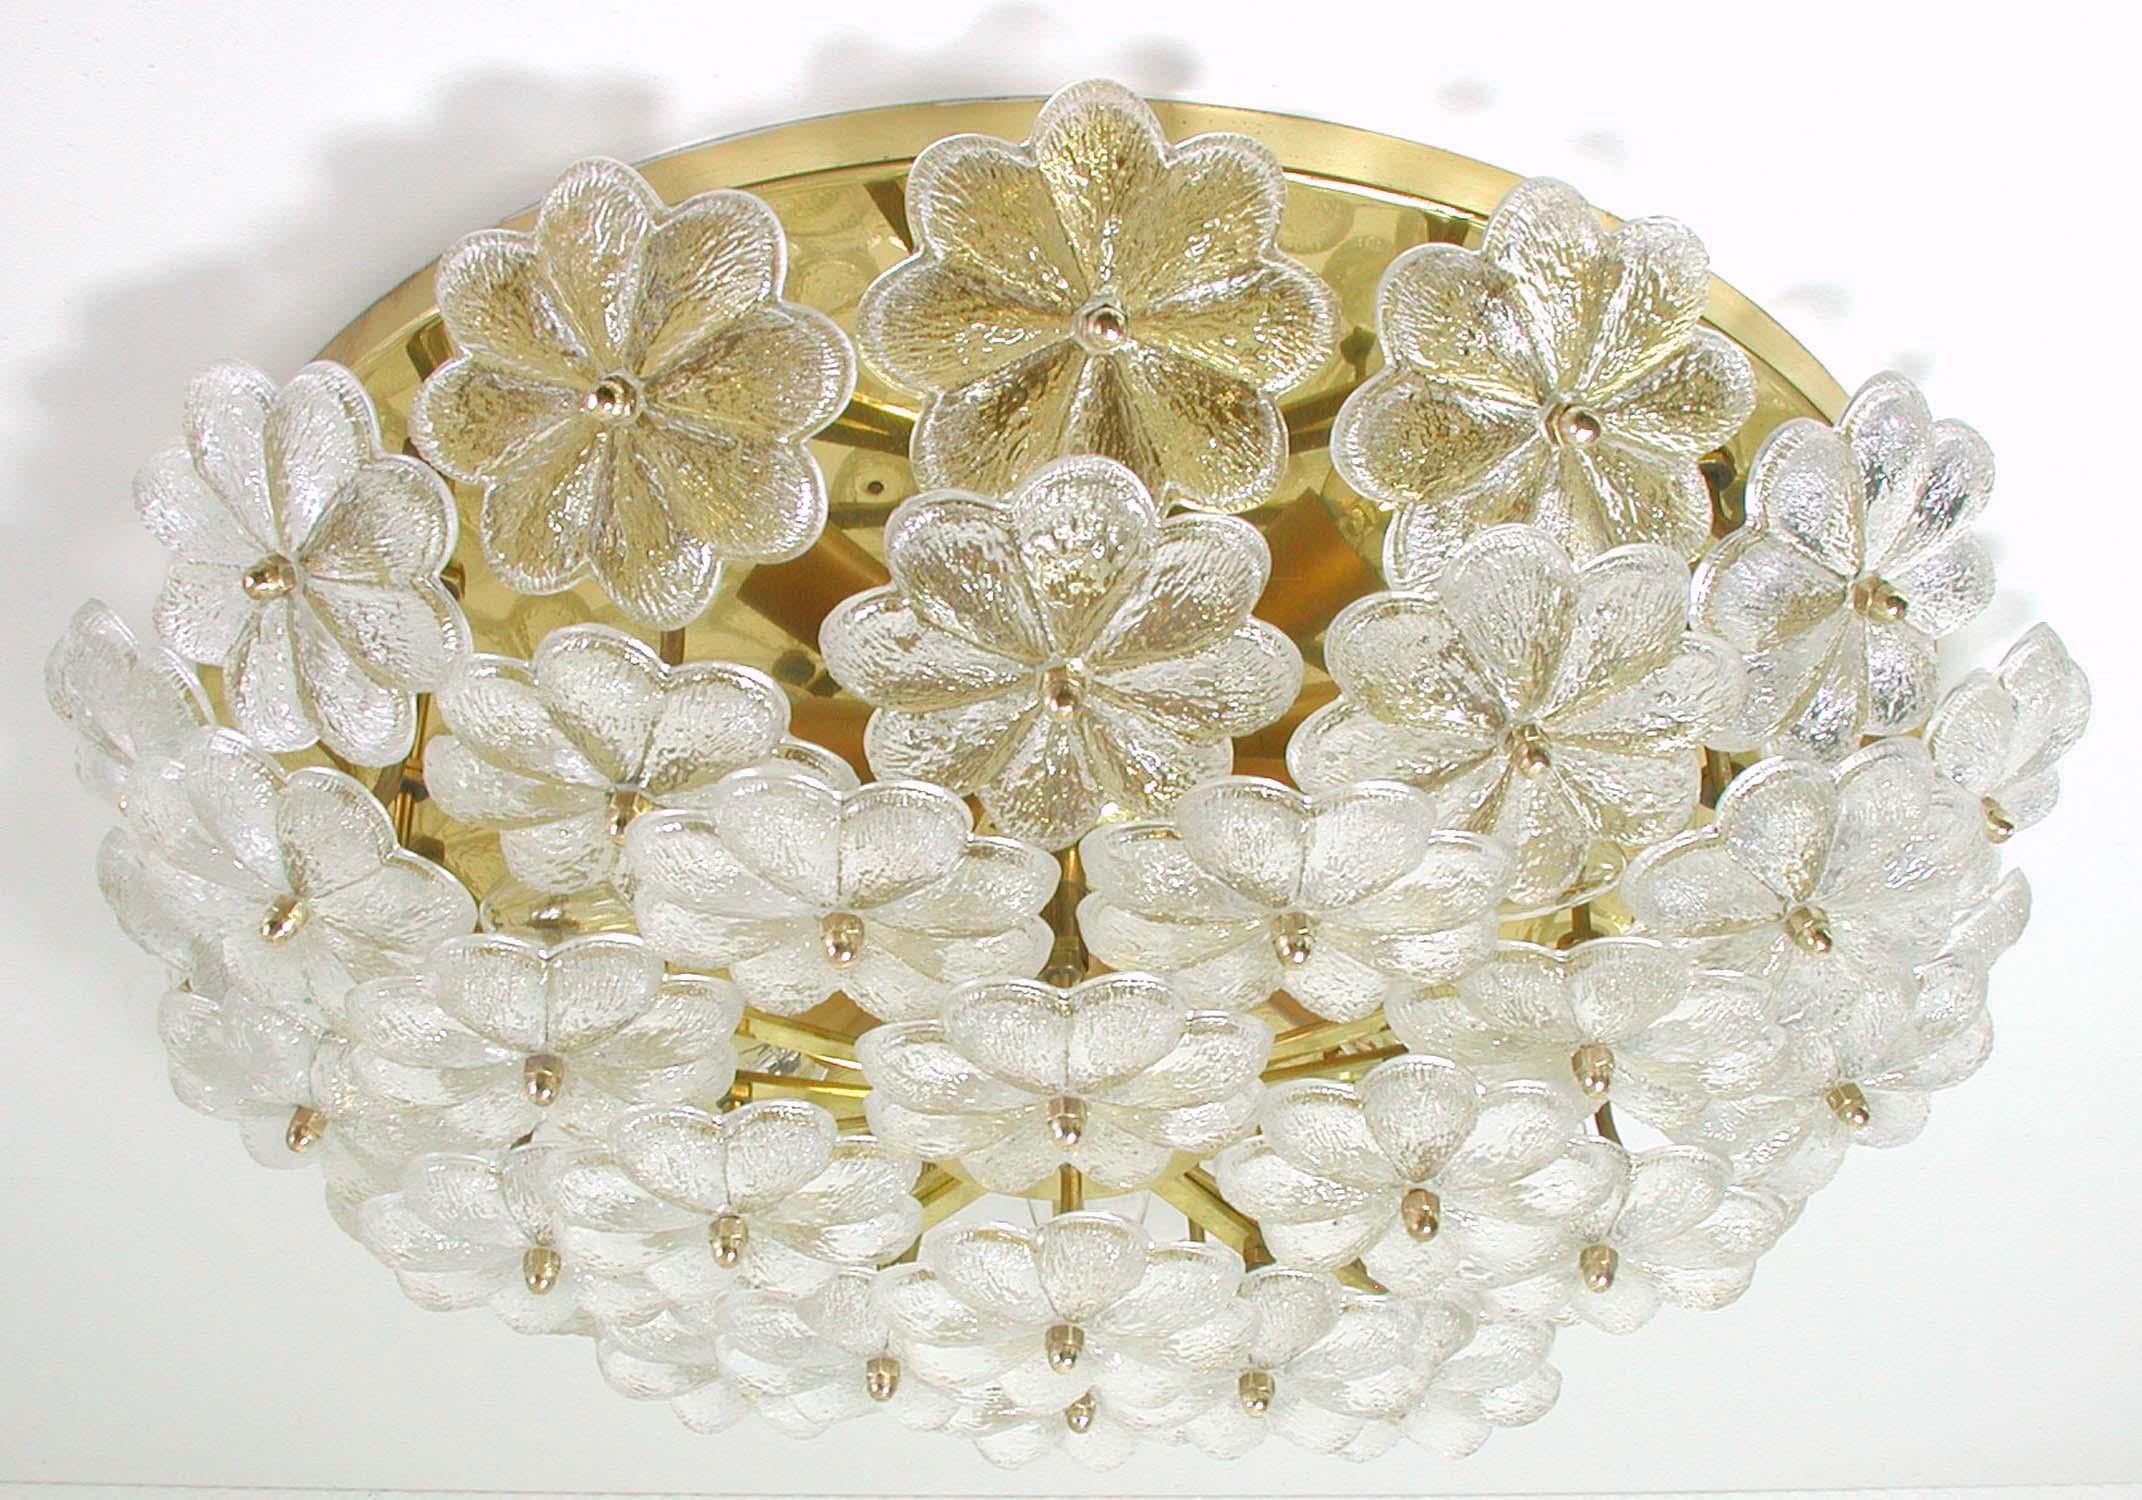 This beautiful flush mount or sconce was manufactured in Germany by Ernst Palme in the 1960s.
It is made of brass and has got 42 Murano glass blossoms. Very heavy quality.

The fixture requires 6 E14 standard bulbs with 40W max each and is